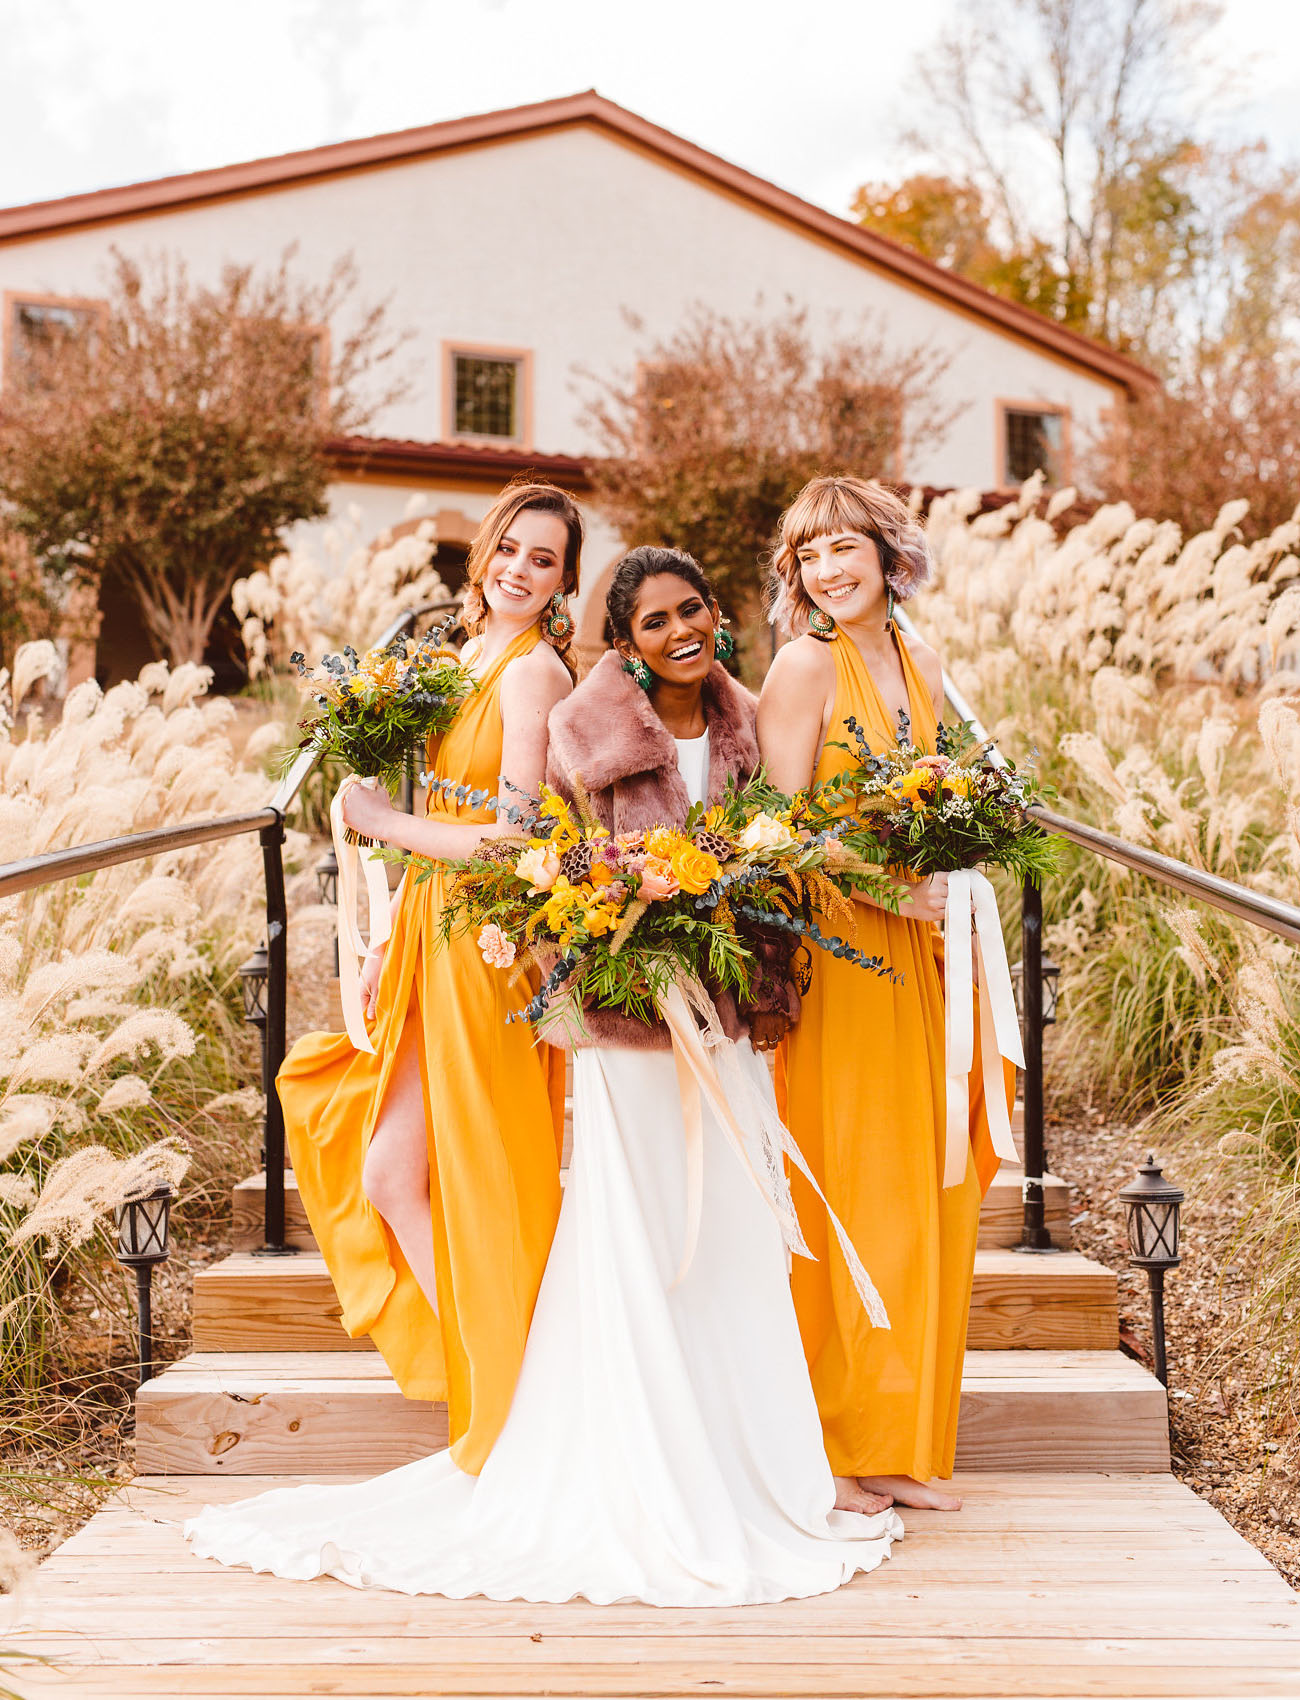 The bridesmaids were wearing chic mustard yellow maxi dresses with slits and statement earrings